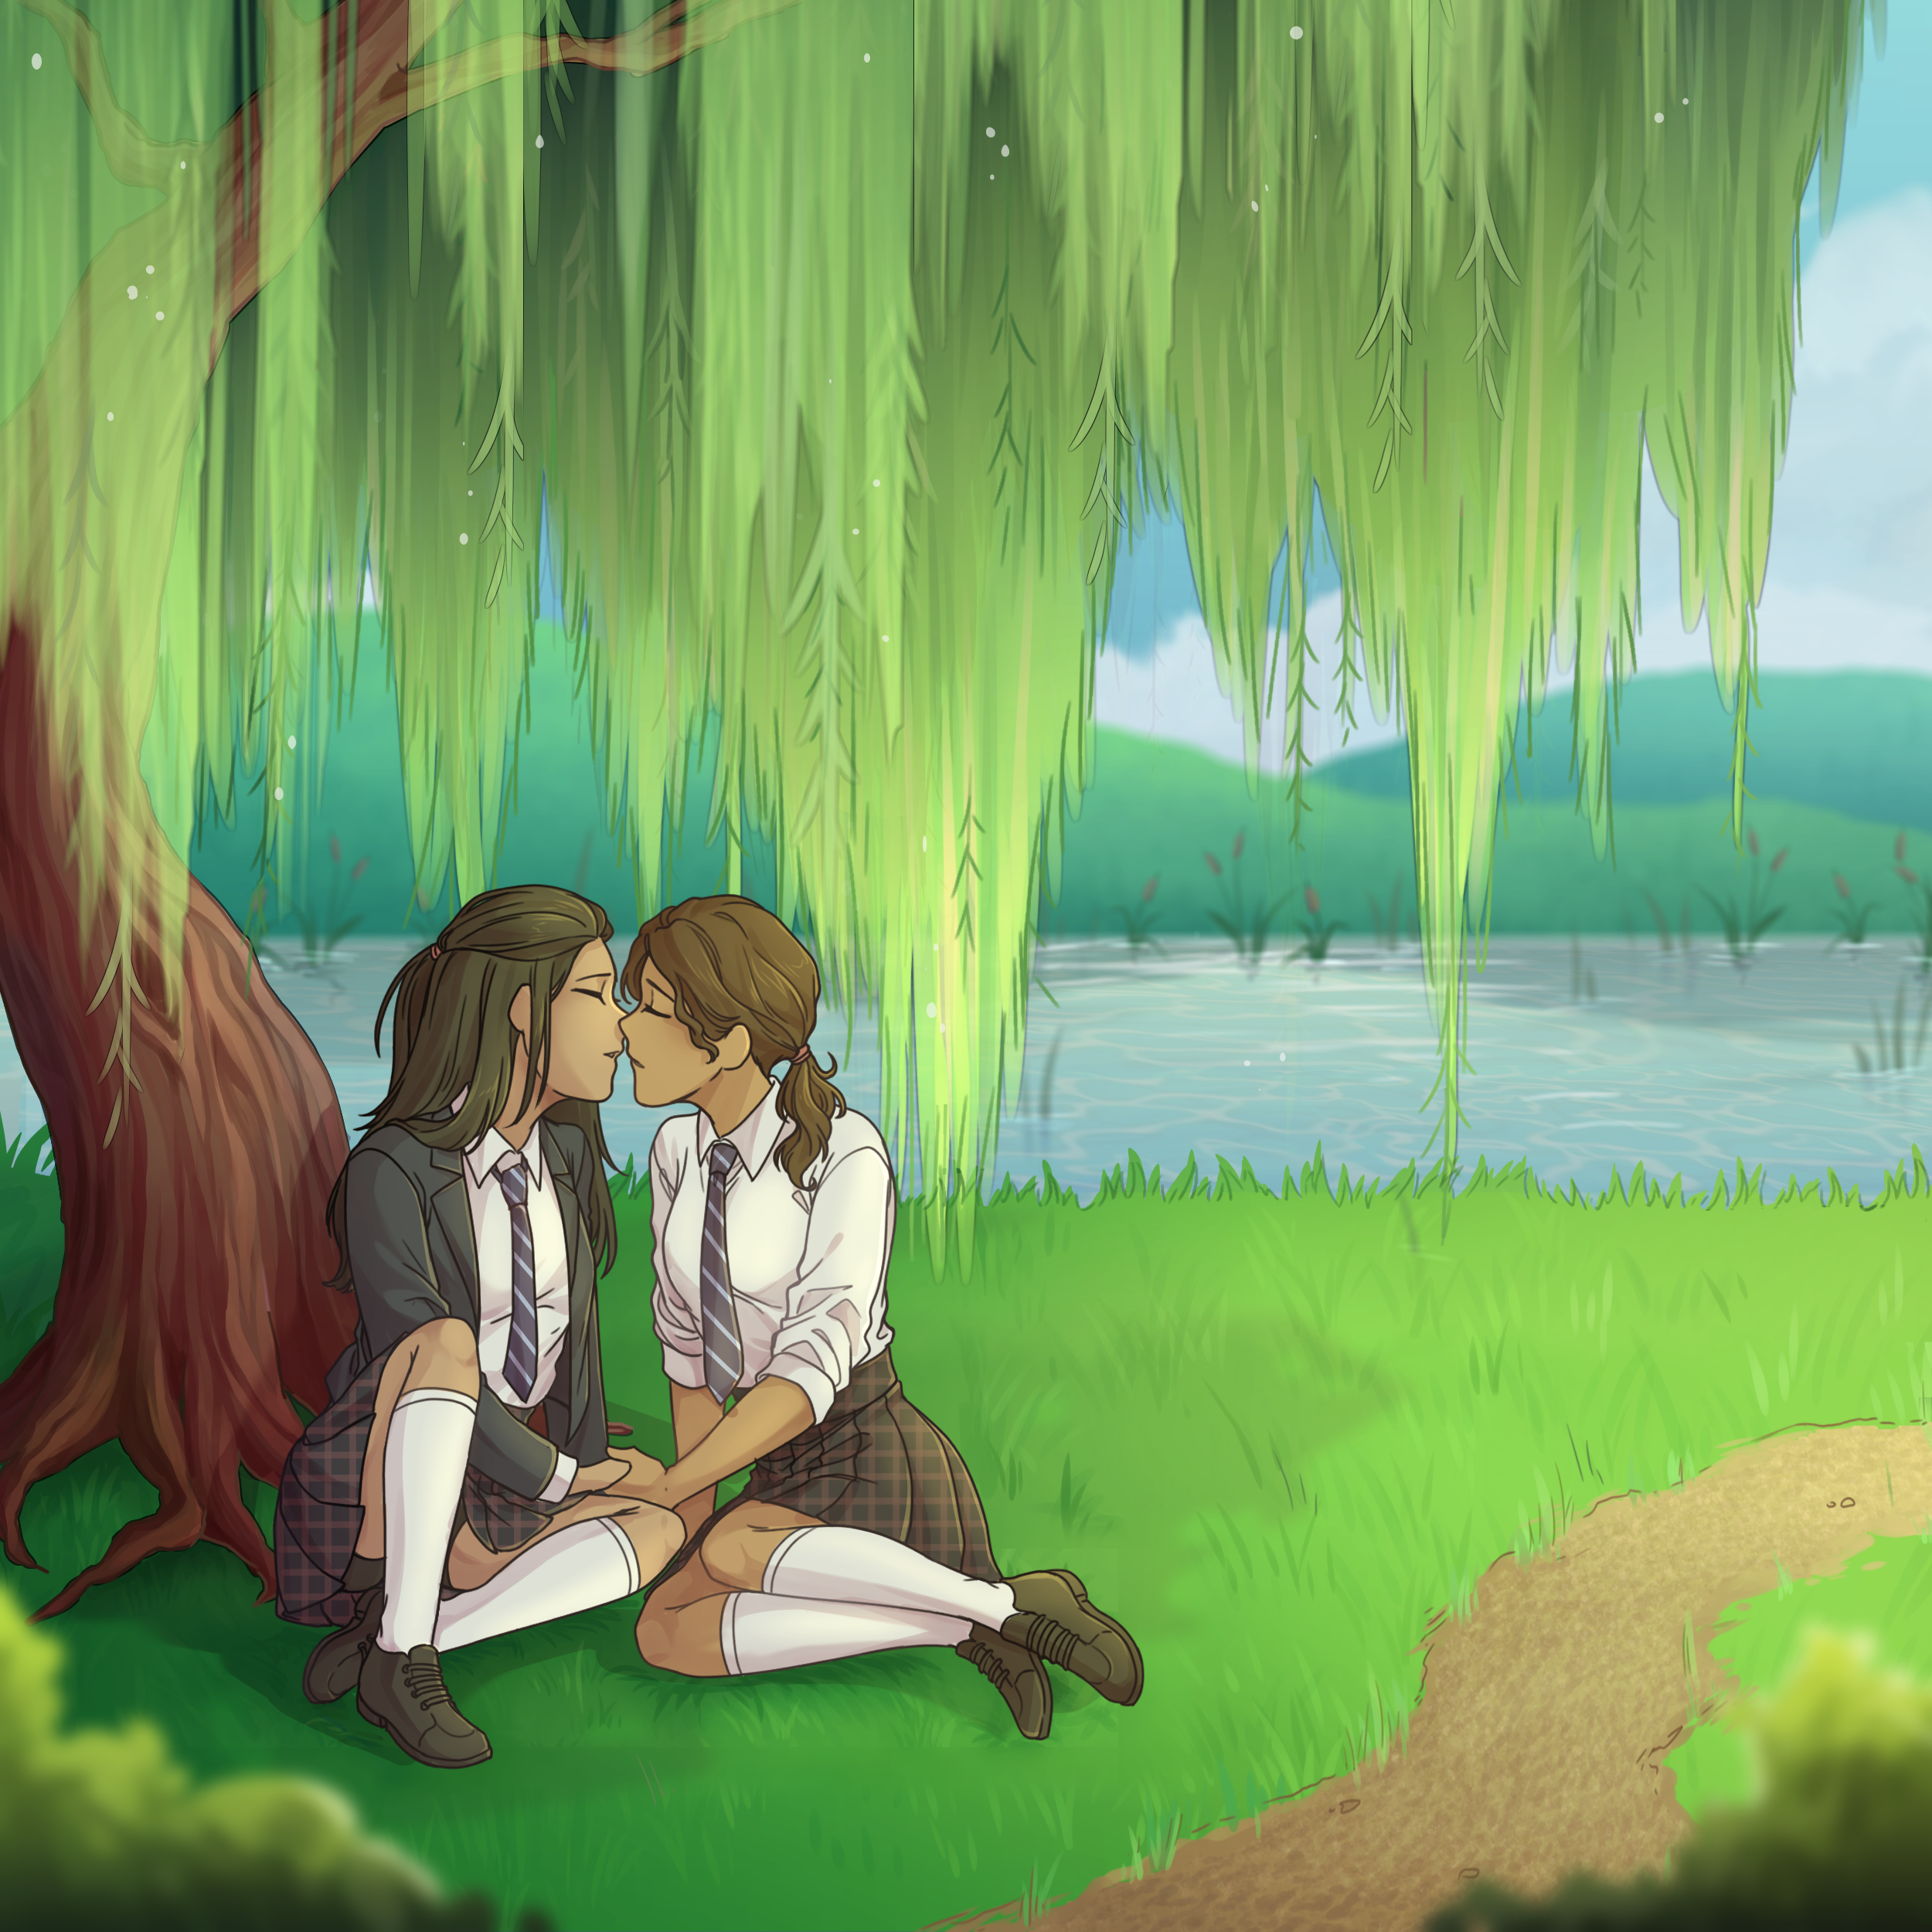 Two girls in school uniforms sit under a willow tree by a creak bank, holding hands and about to kiss.